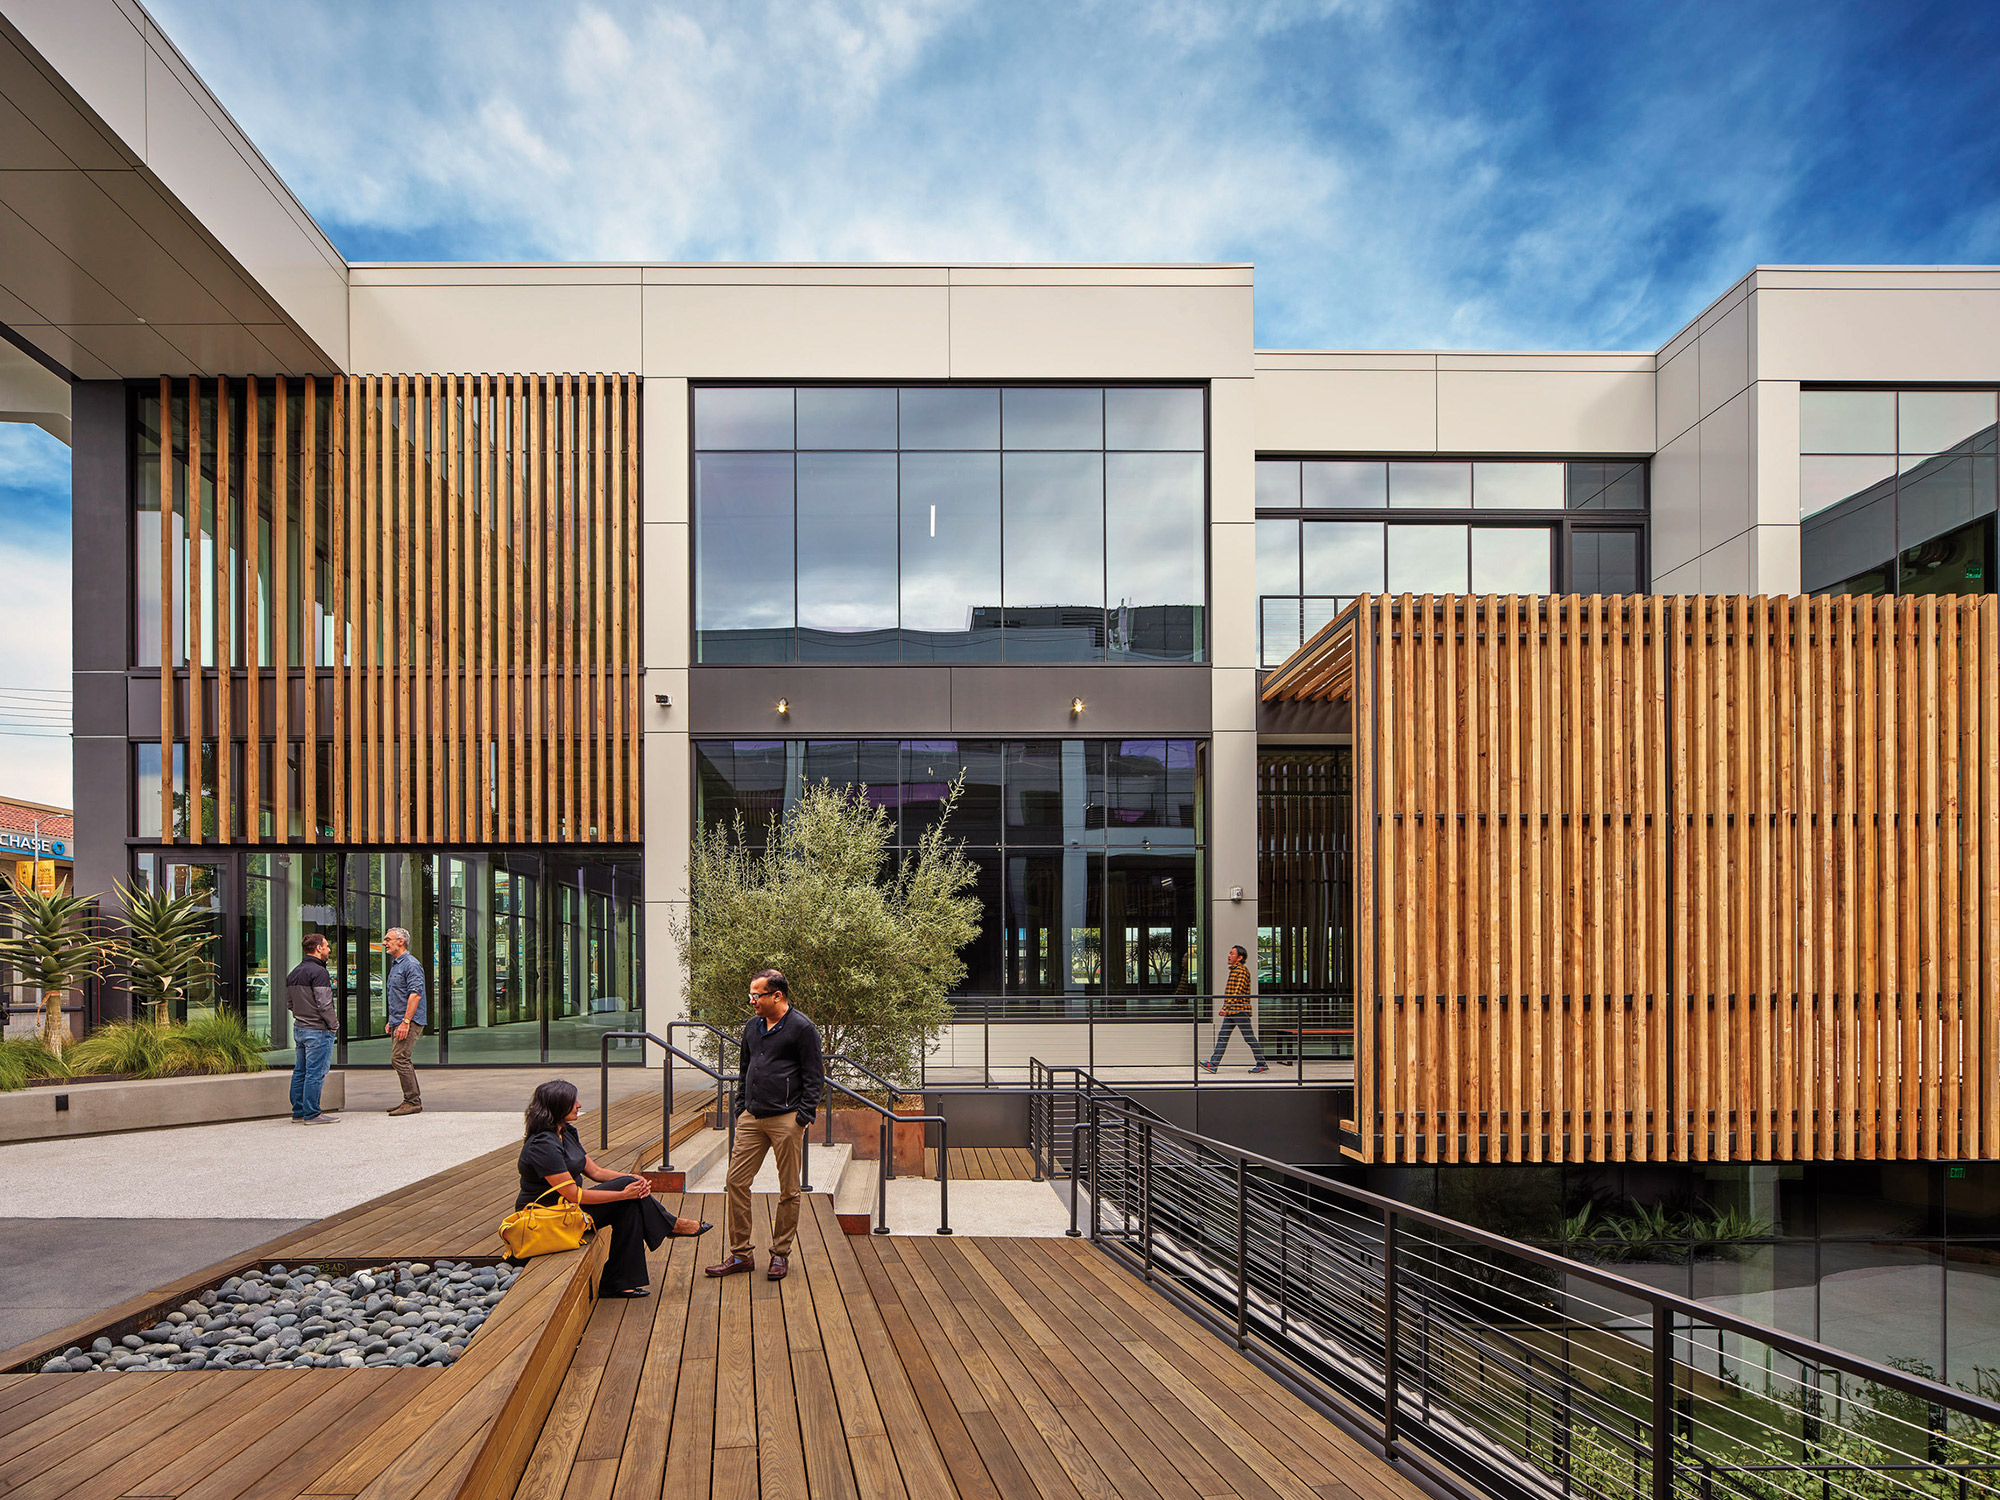 Modern office building with an outdoor seating area featuring wood slat accents, where people engage in casual conversation.